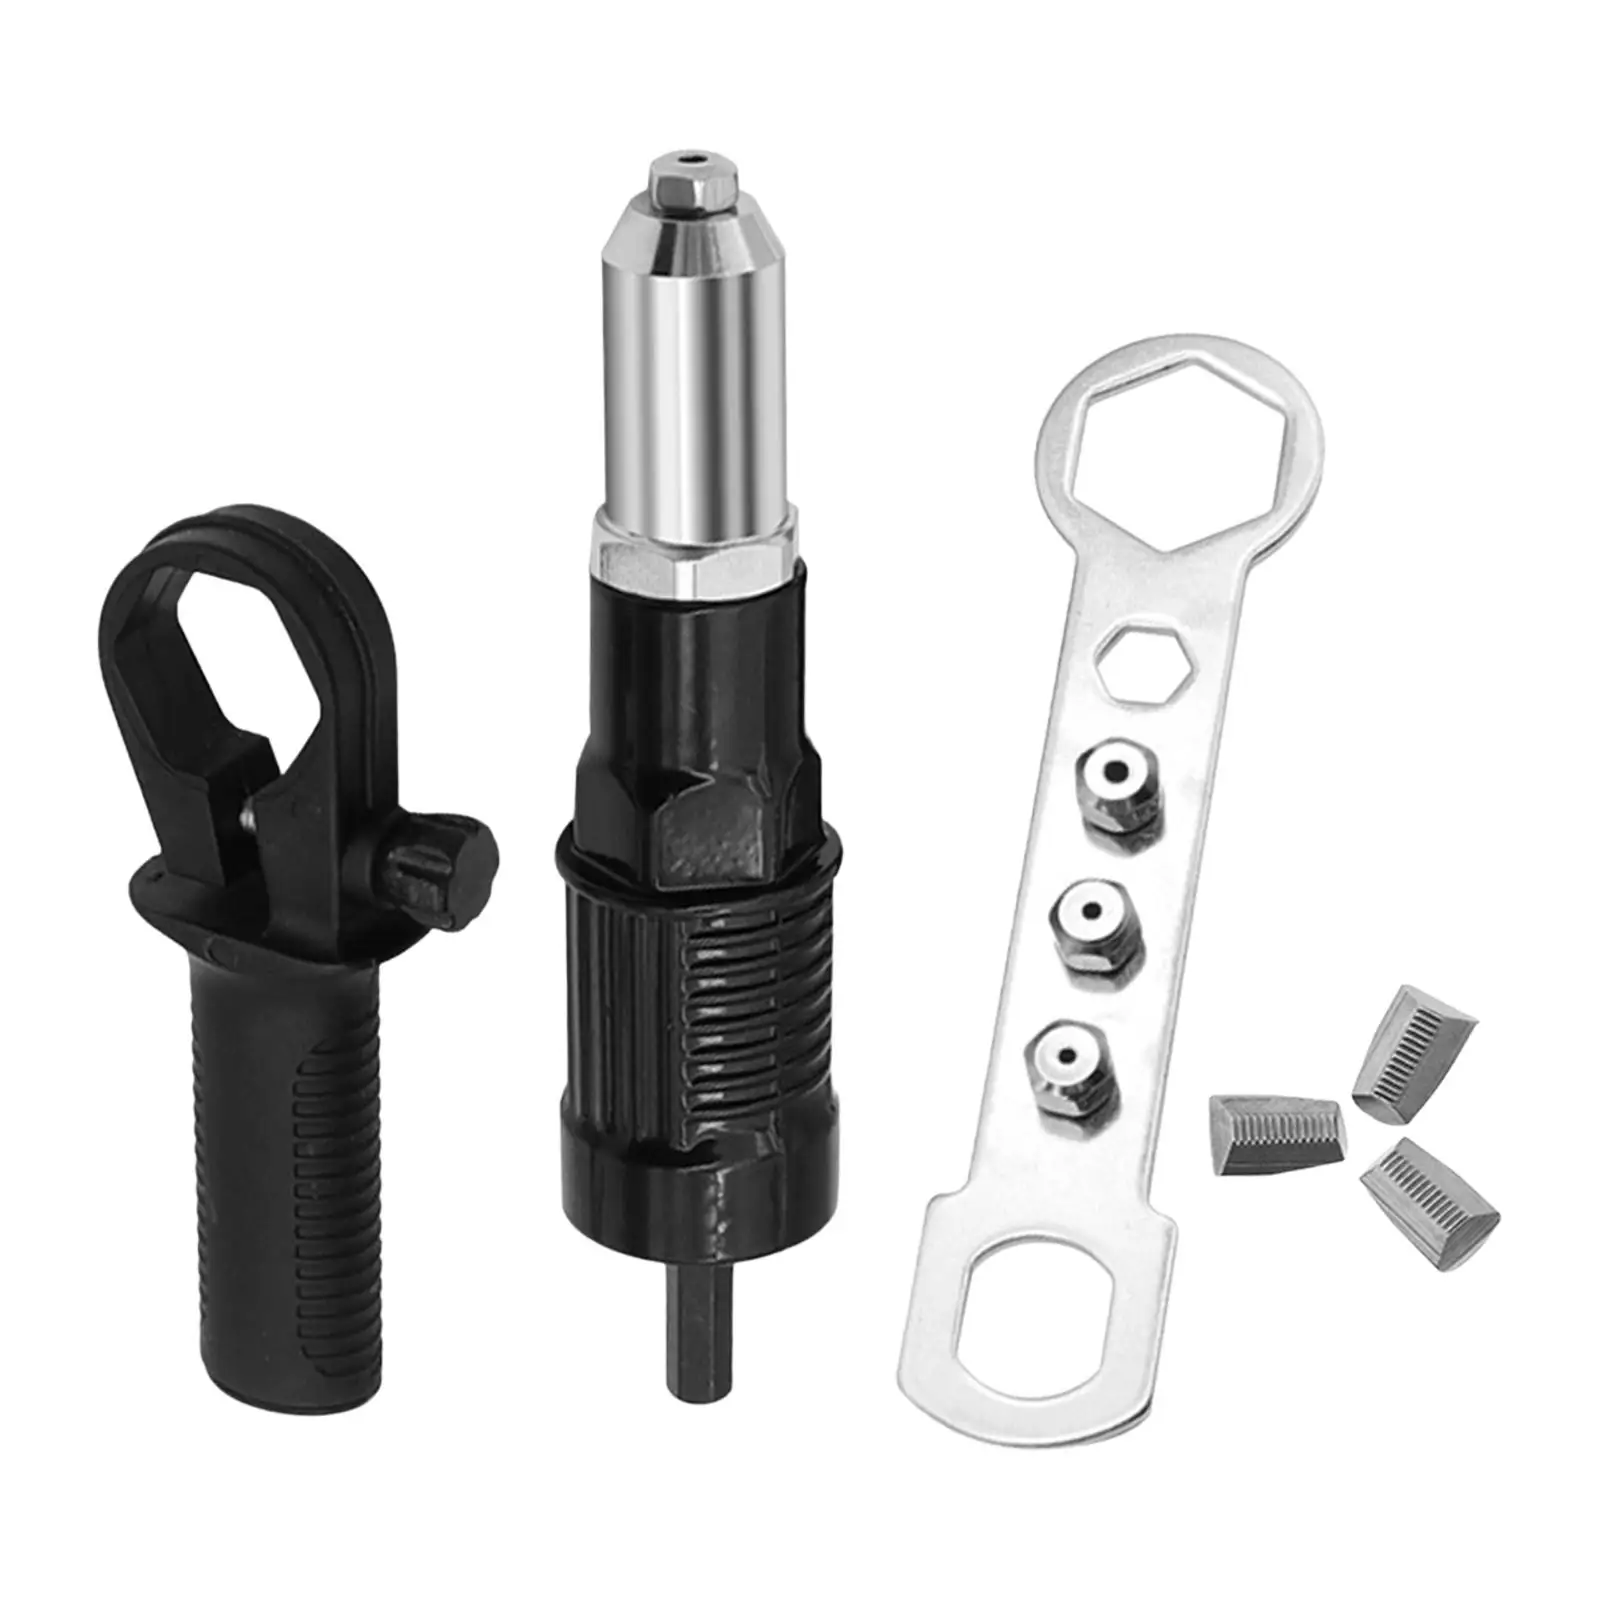 Electric Rivet Nut Drill Adapter Portable Riveter Insert Nut Tools Accessories Riveting Electric Rivet Joint Pulling